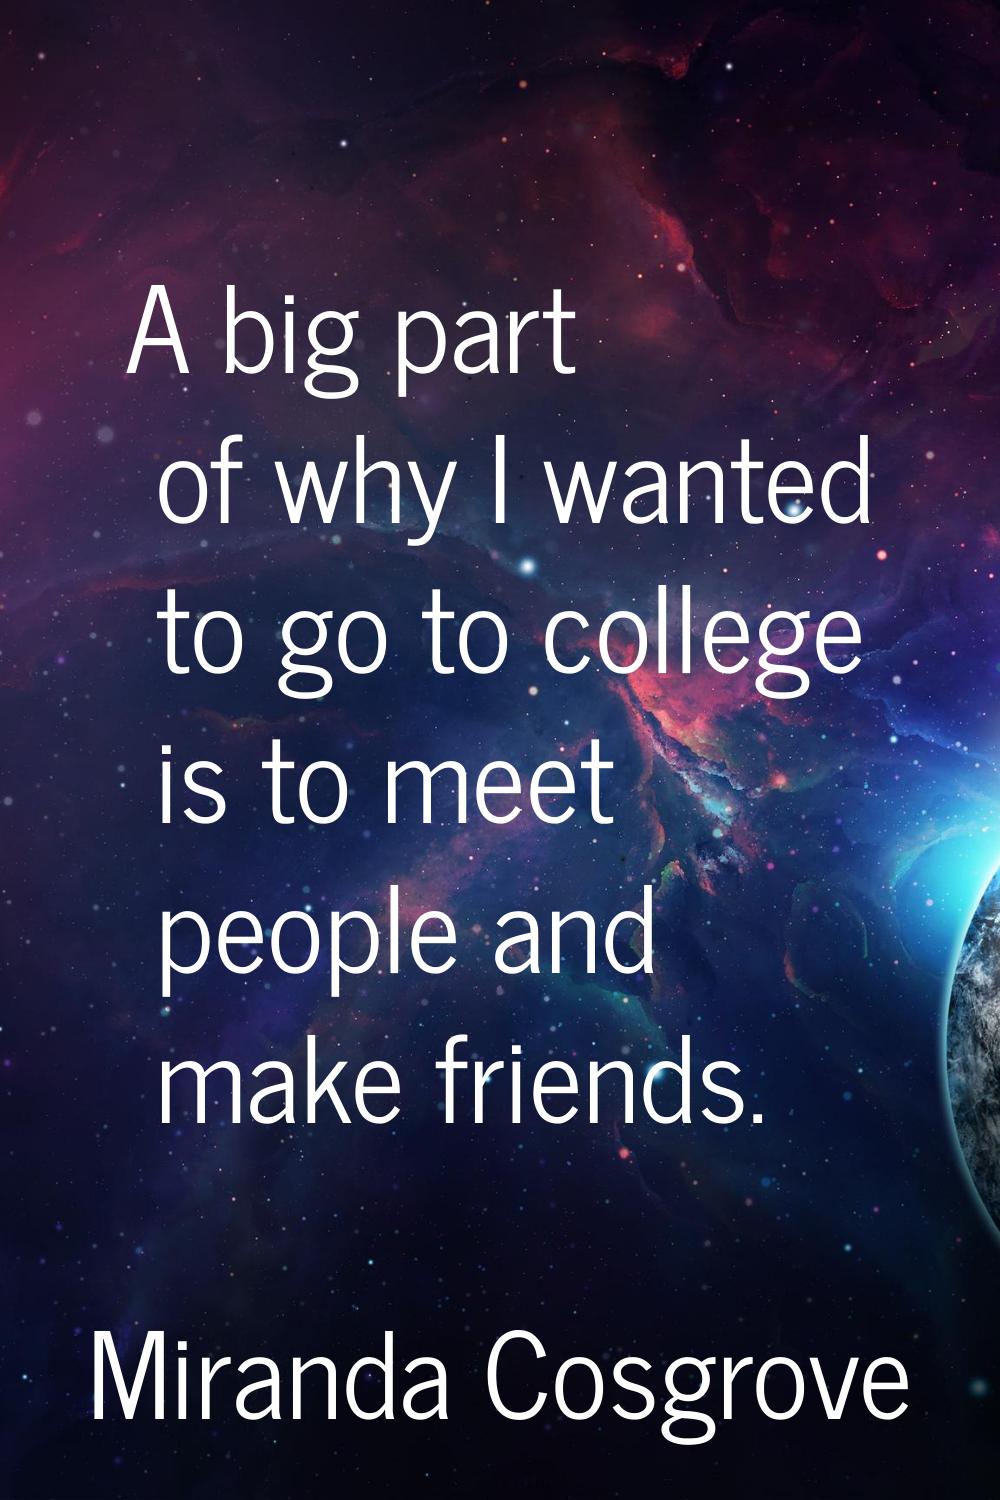 A big part of why I wanted to go to college is to meet people and make friends.